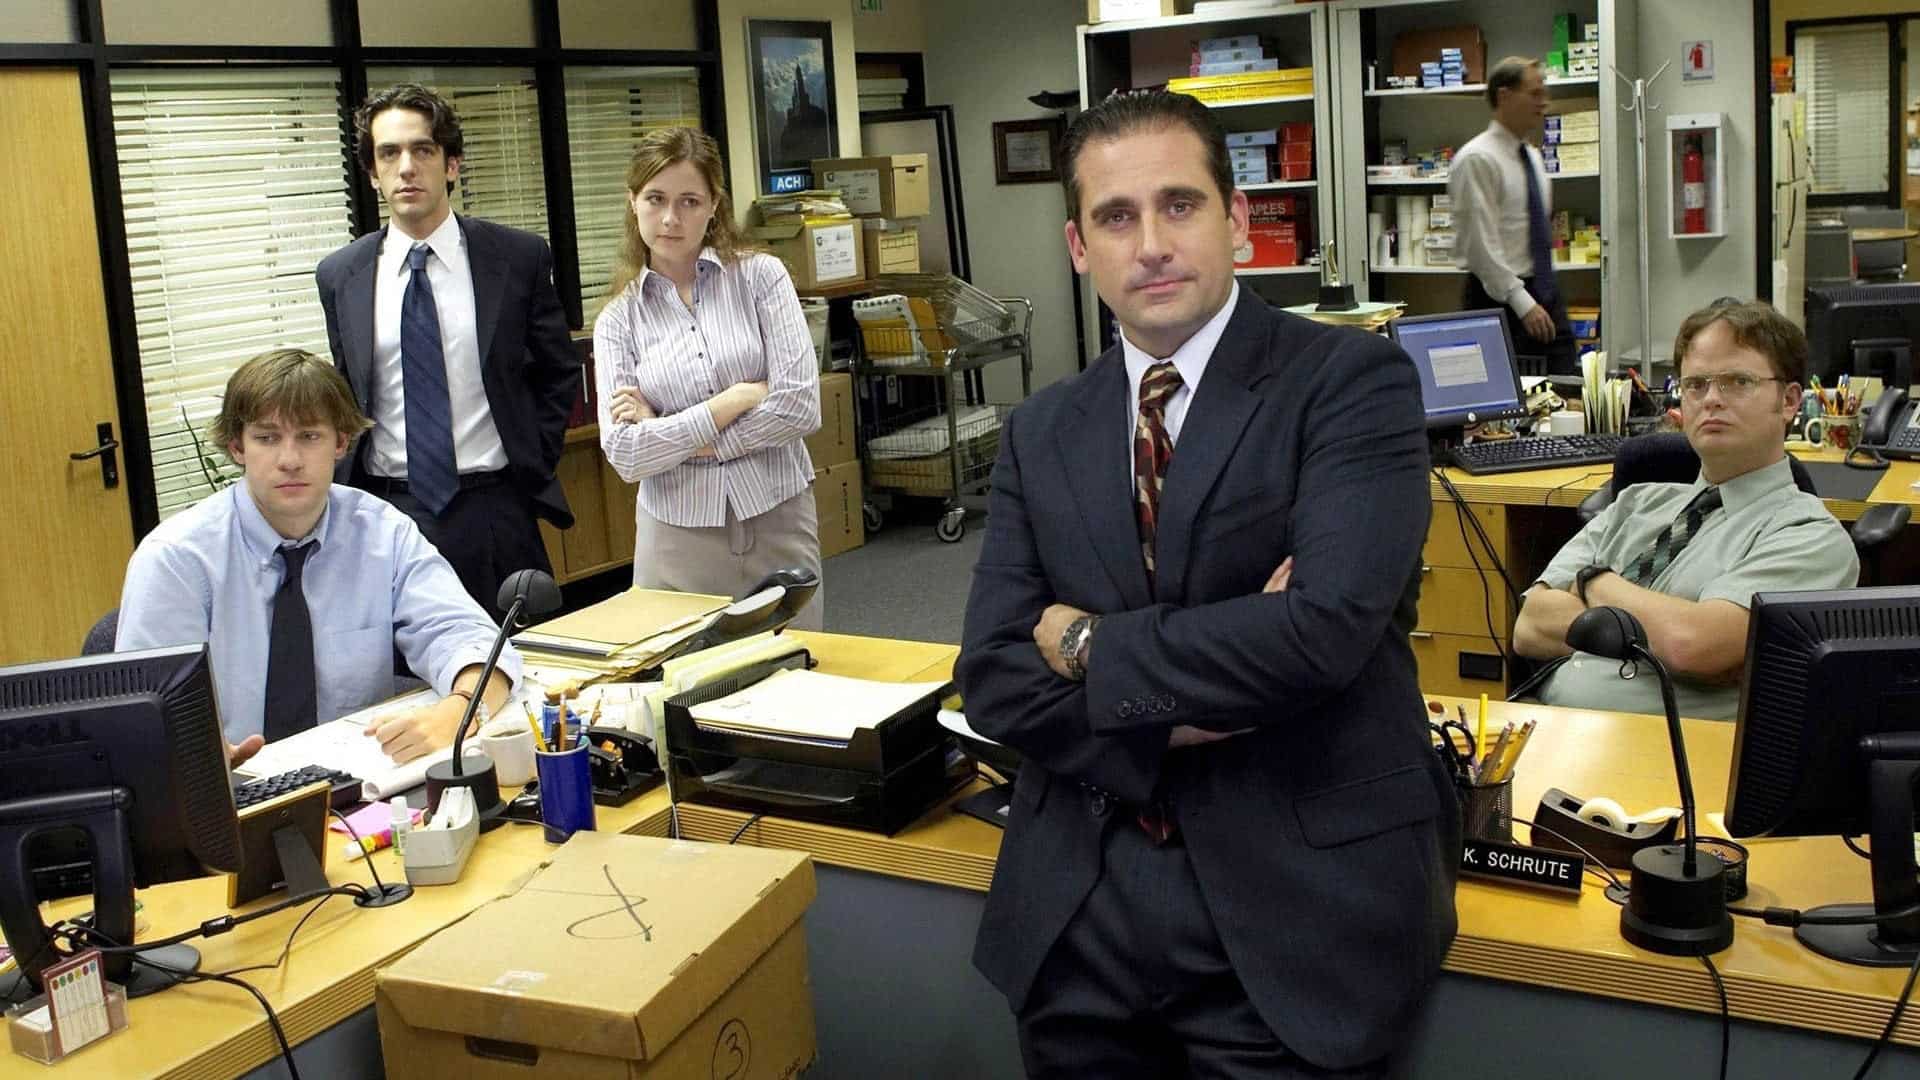 the office reboot